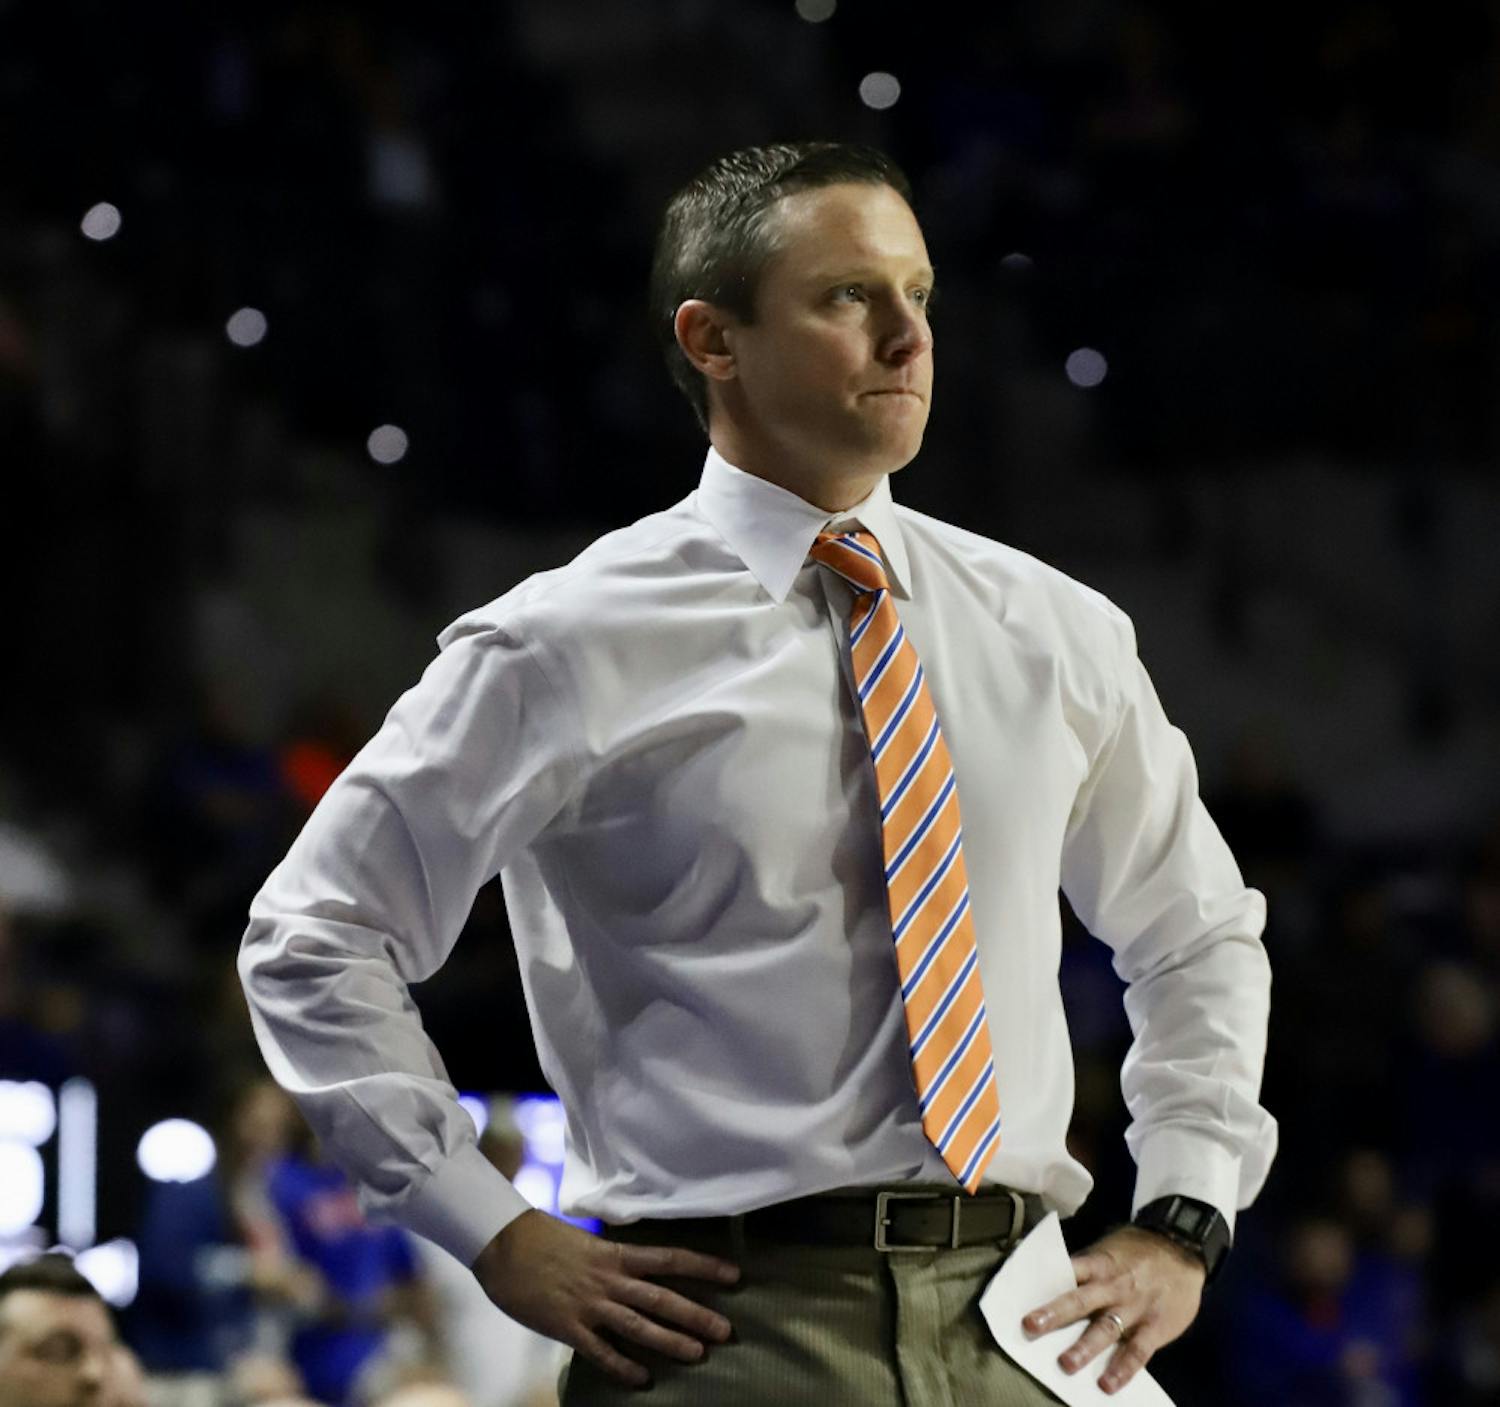 The Gators' pushed back their 2020-2021 debut yet again due to another COVID-19 outbreak. This time, Florida's opponent, Oklahoma, caused the cancelation. 